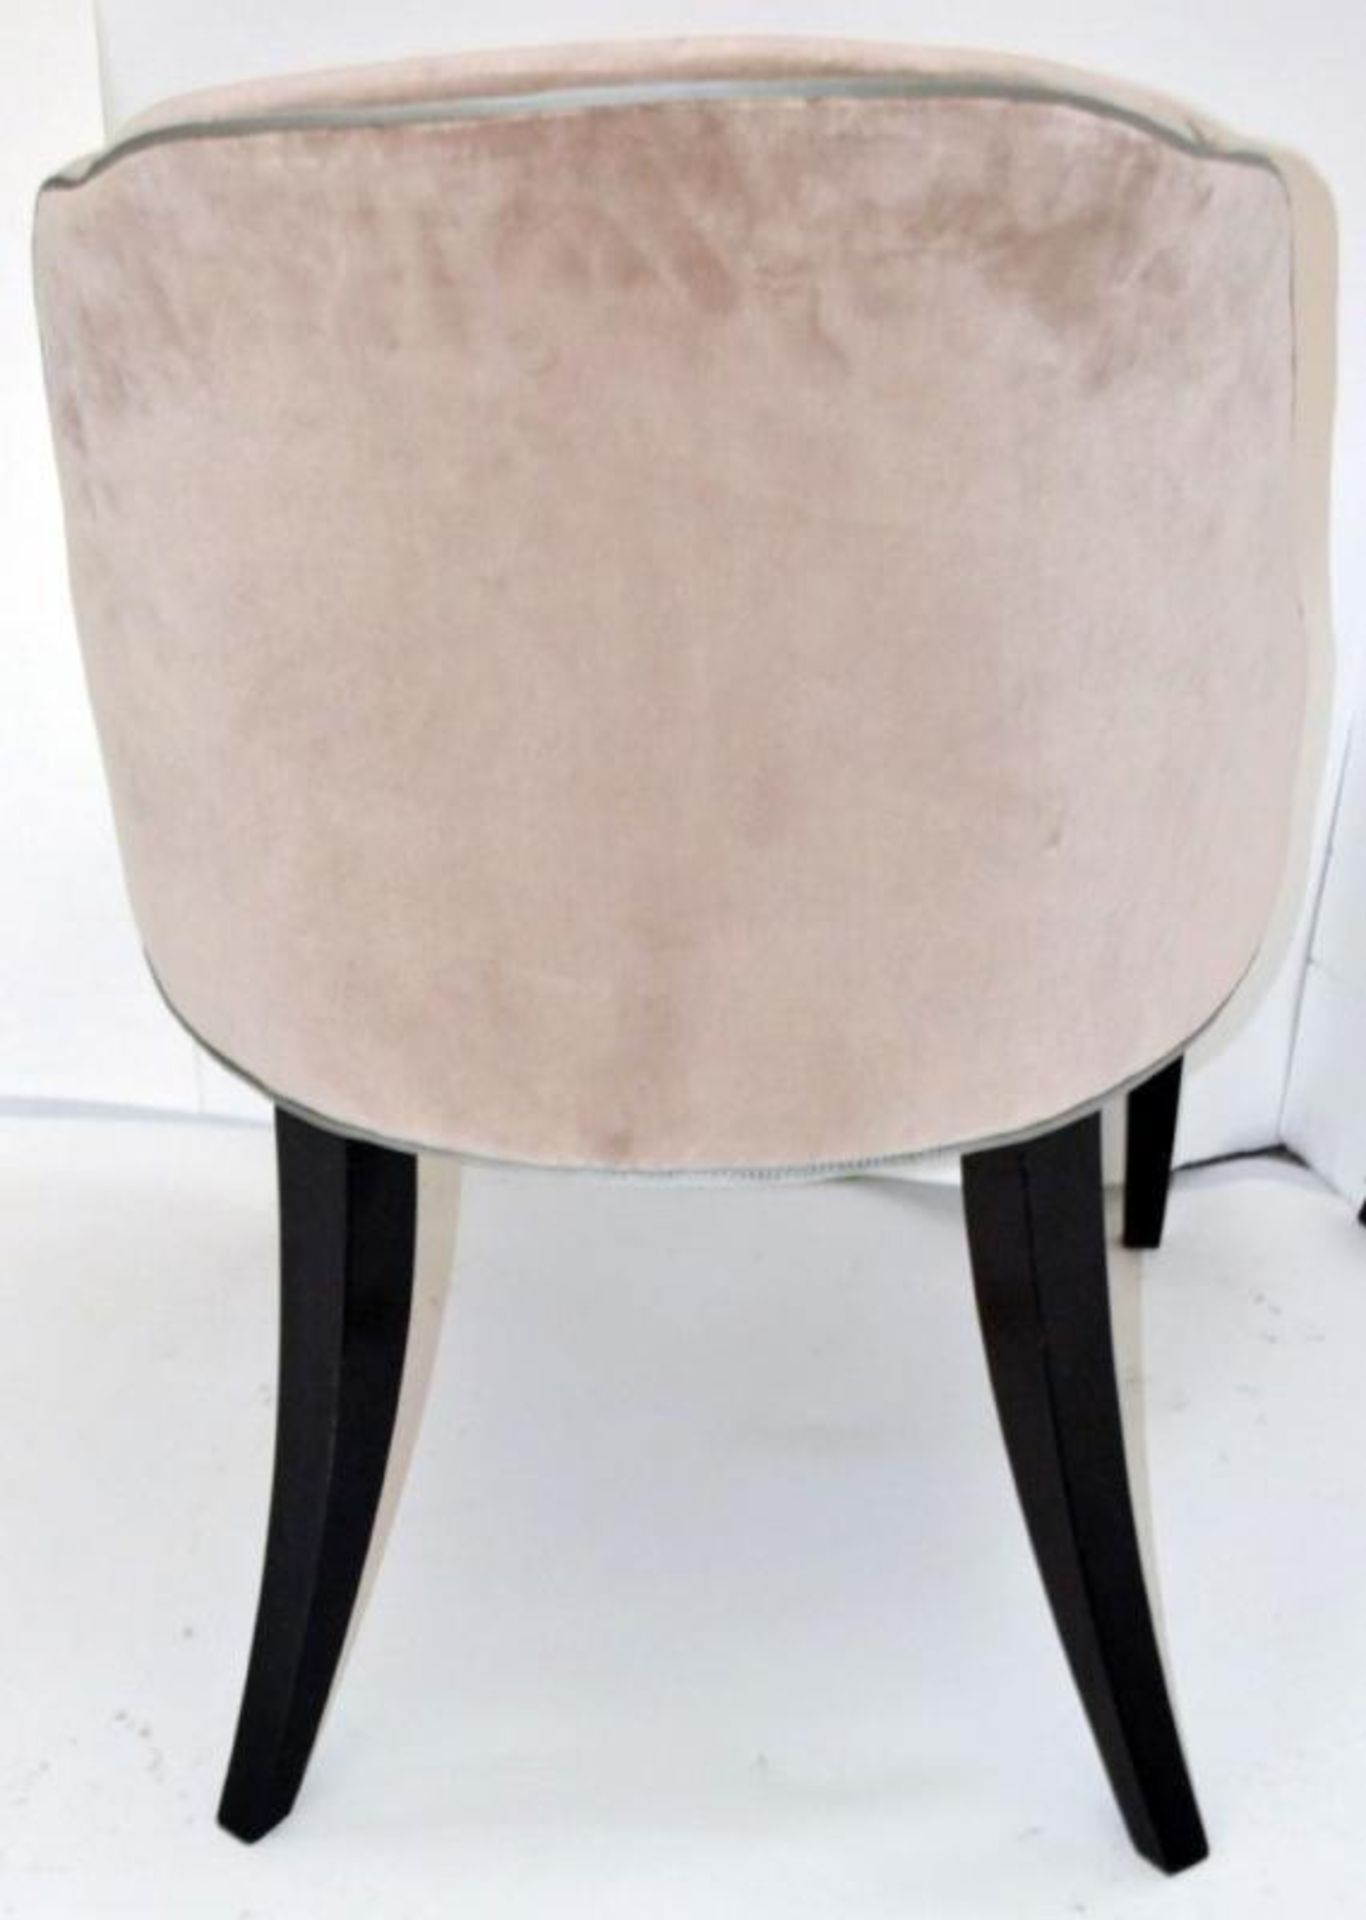 1 x REED &amp; RACKSTRAW "Cloud" Velvet Upholstered Handcrafted Chair - Dimensions: H87 x W58 x D5 - Image 12 of 12